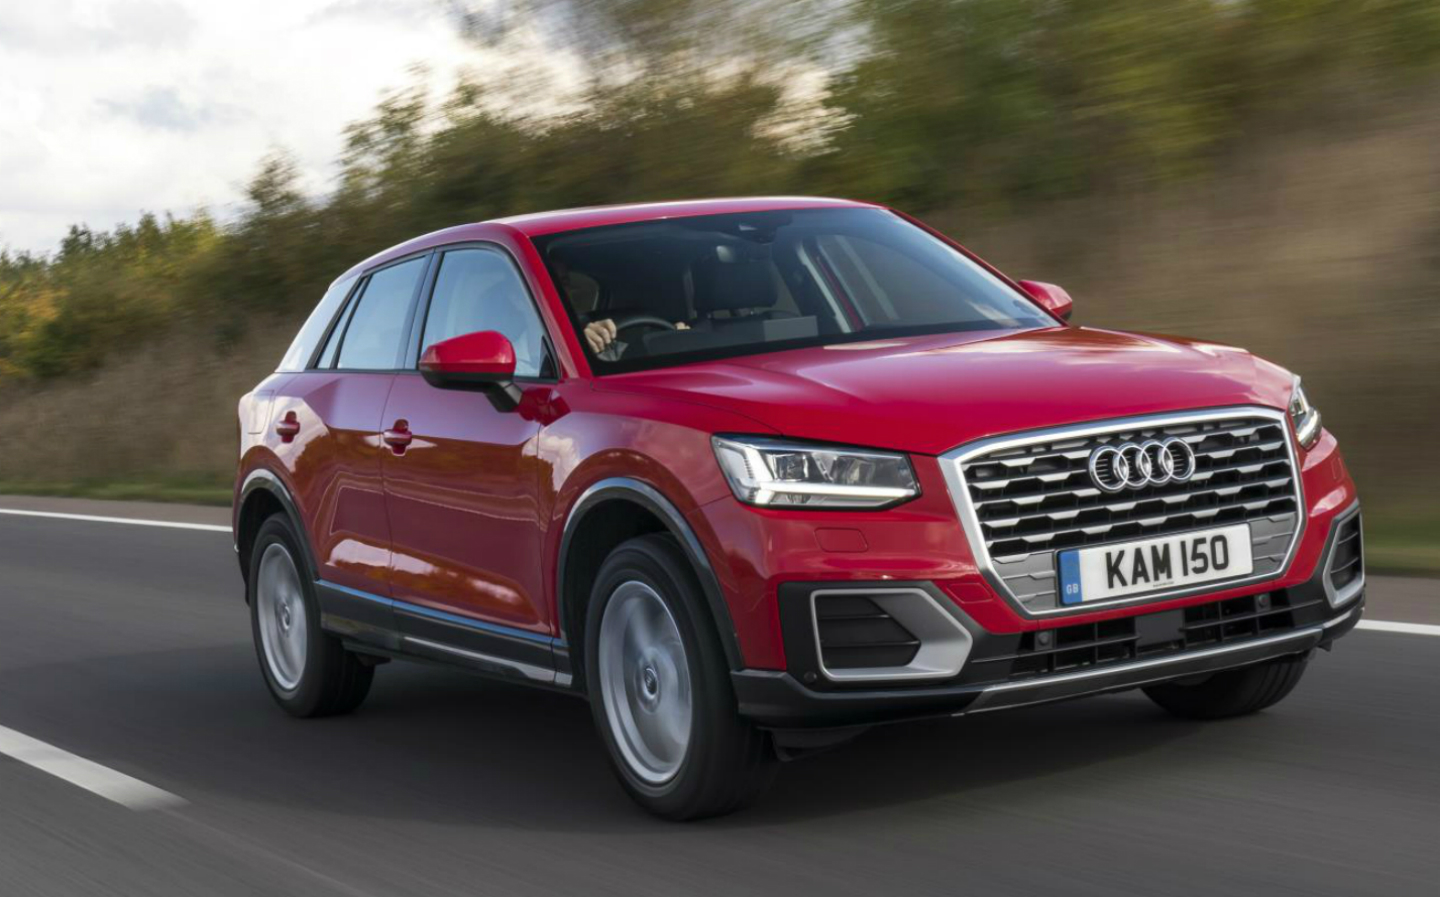 https://www.driving.co.uk/wp-content/uploads/sites/5/2016/06/Audi-Q2-review-2.jpg